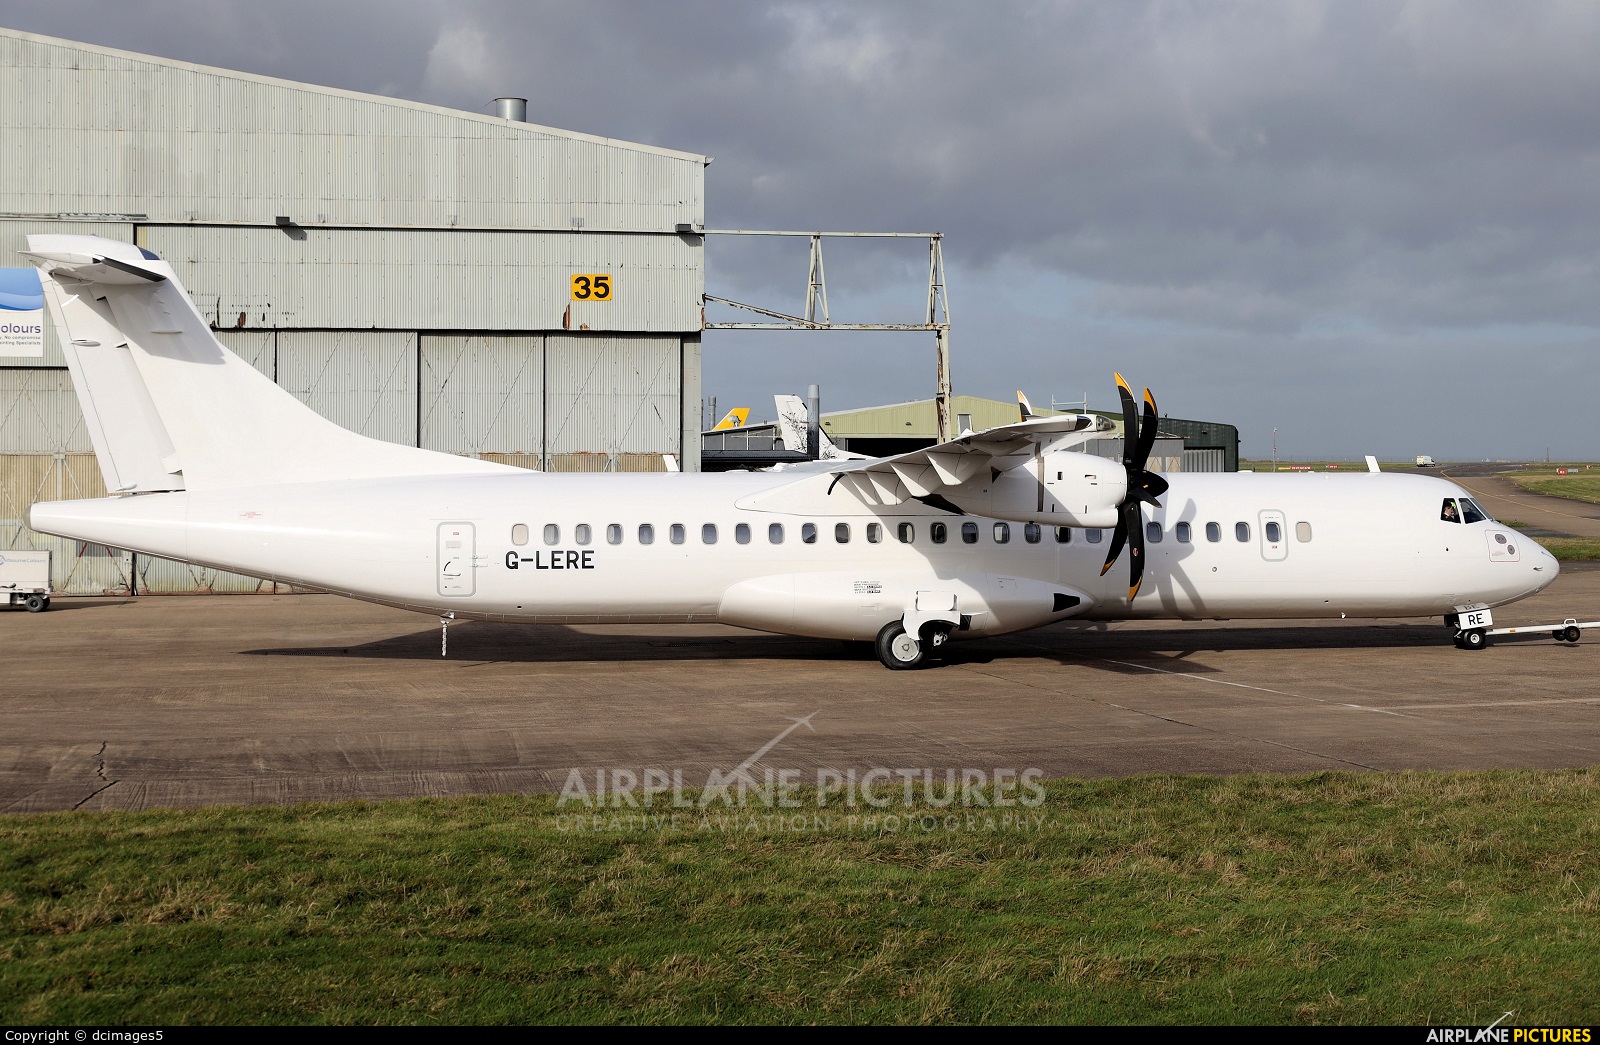 Aurigny Air Services G-LERE aircraft at East Midlands